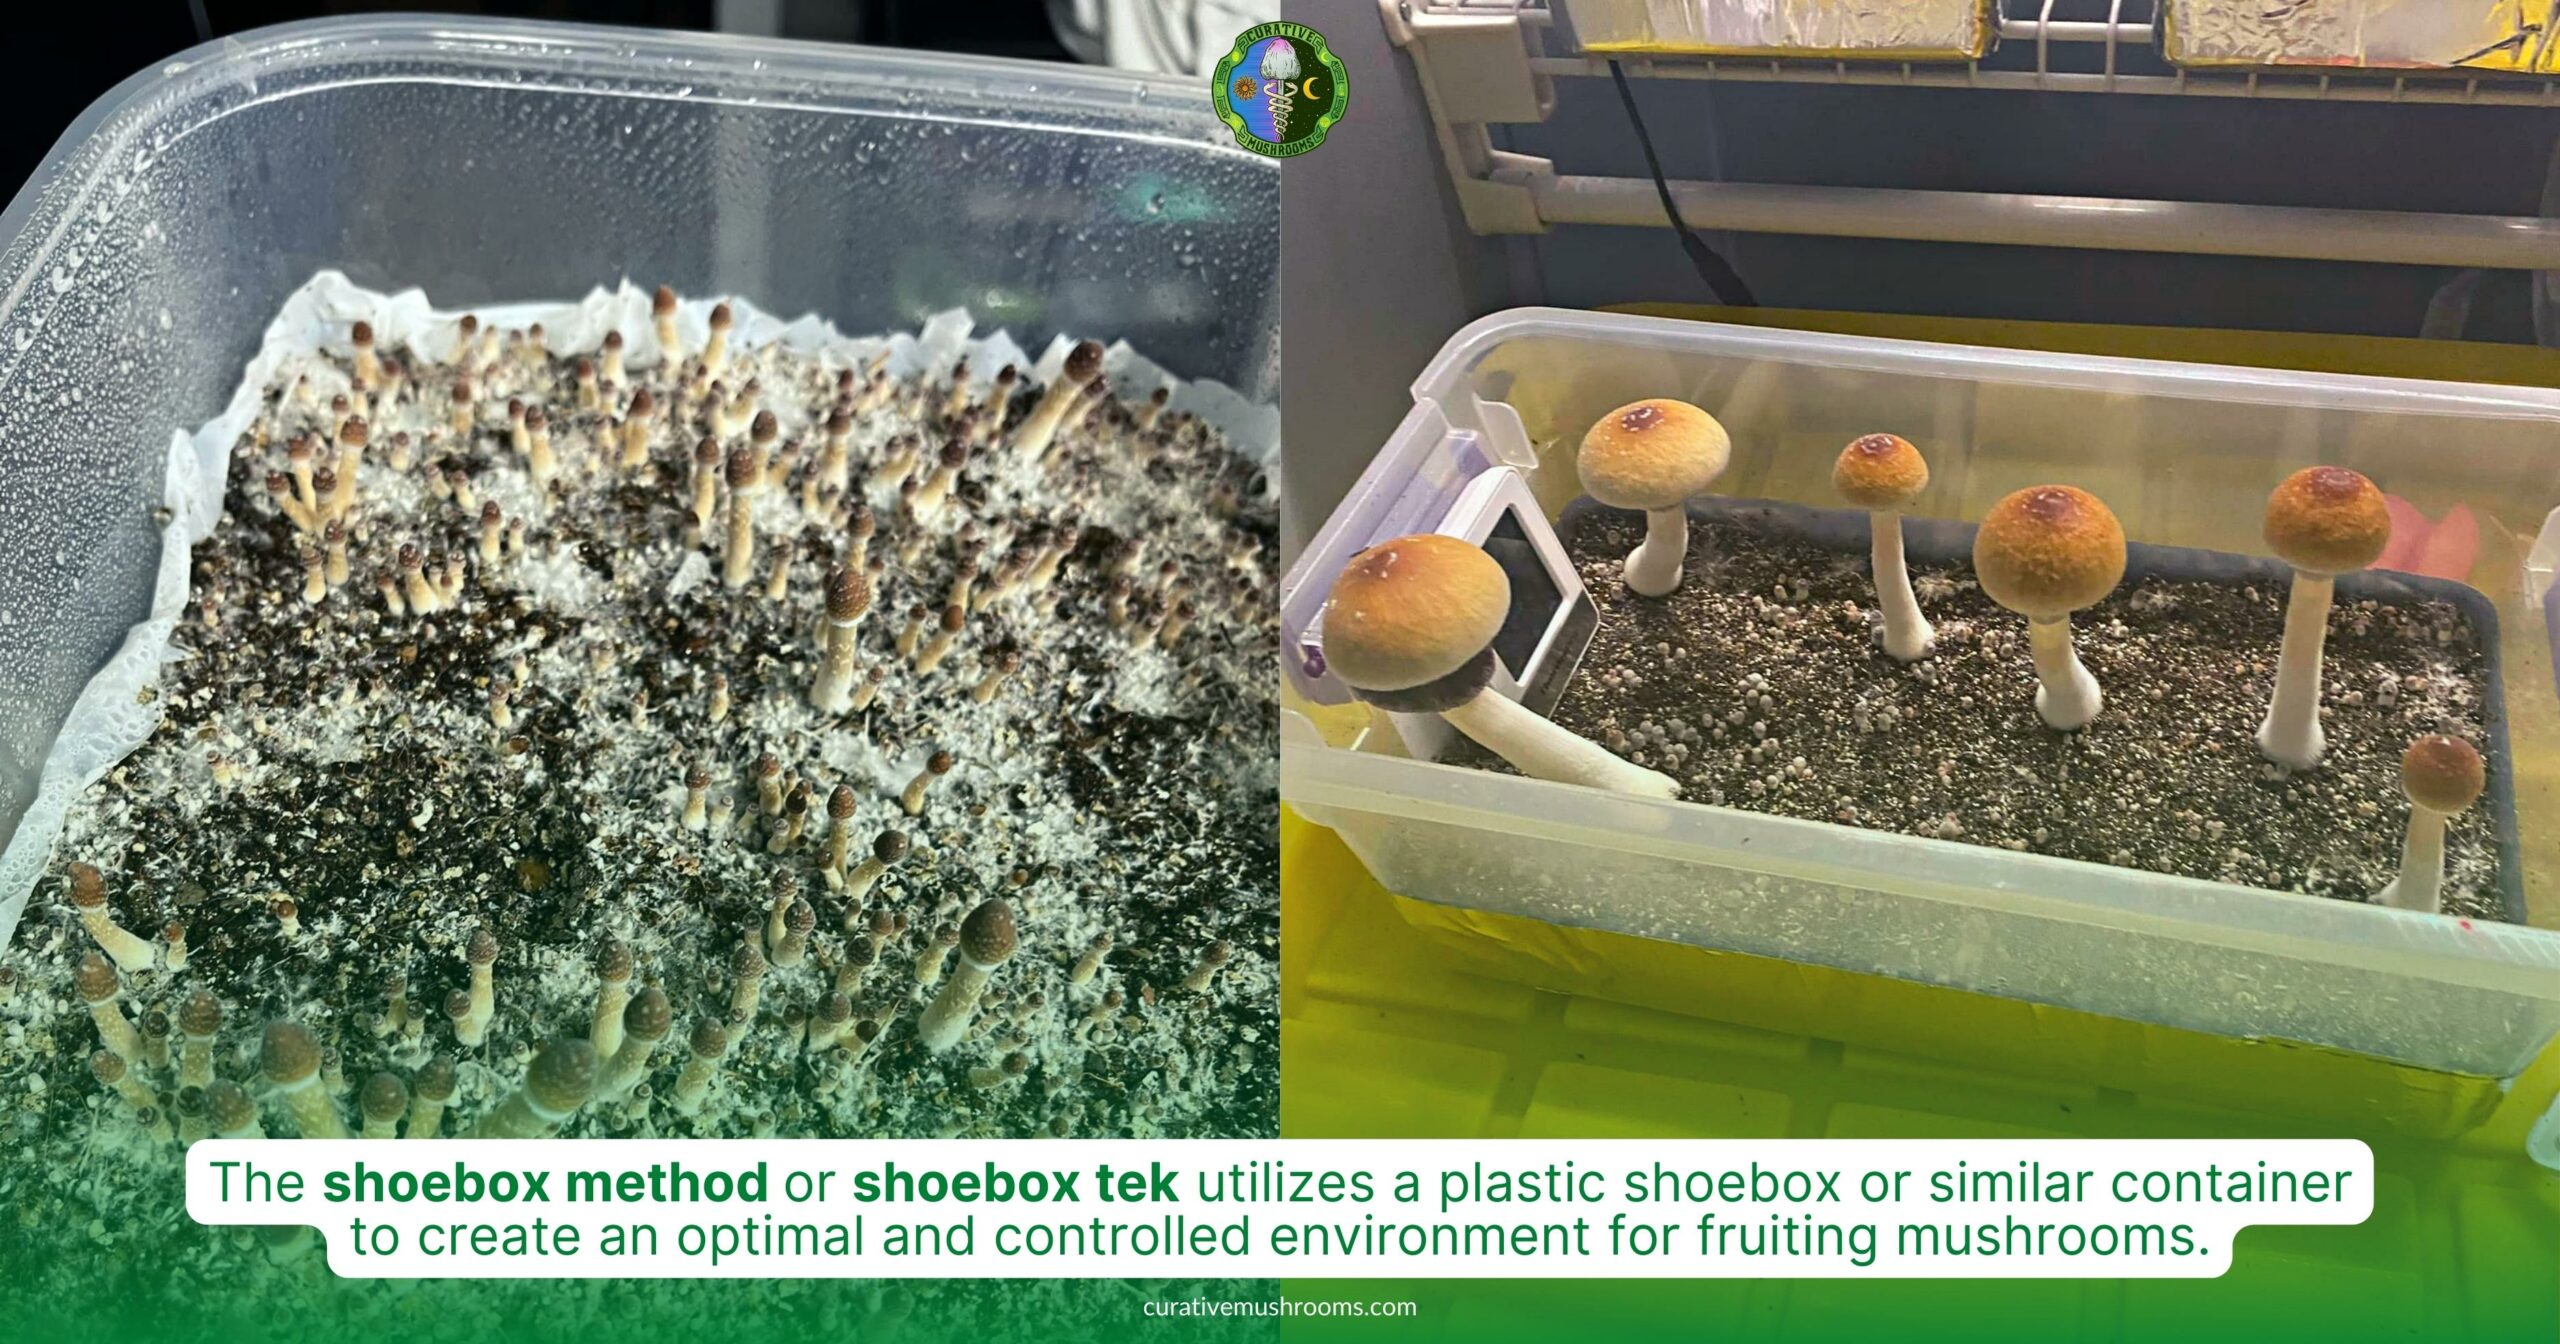 What is the shoebox method - shoebox tek is simpler than monotub - utilizes a plastic shoebox or similar container to create controlled environment for fruiting mushrooms